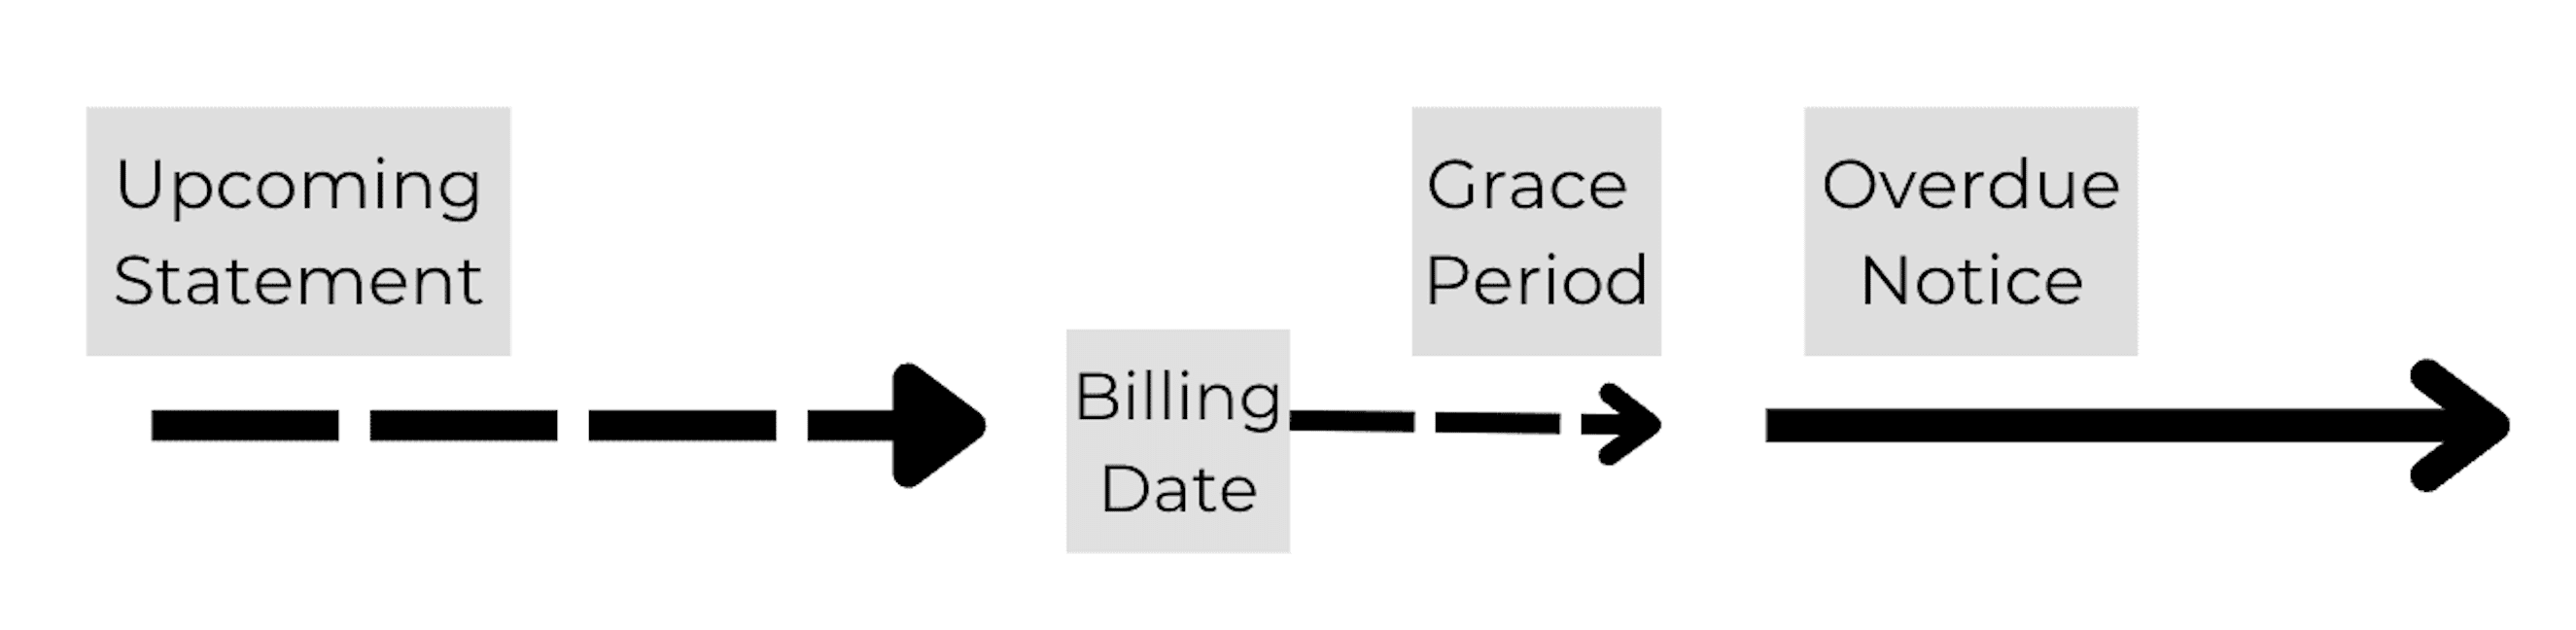 Illustration of the notification flow.